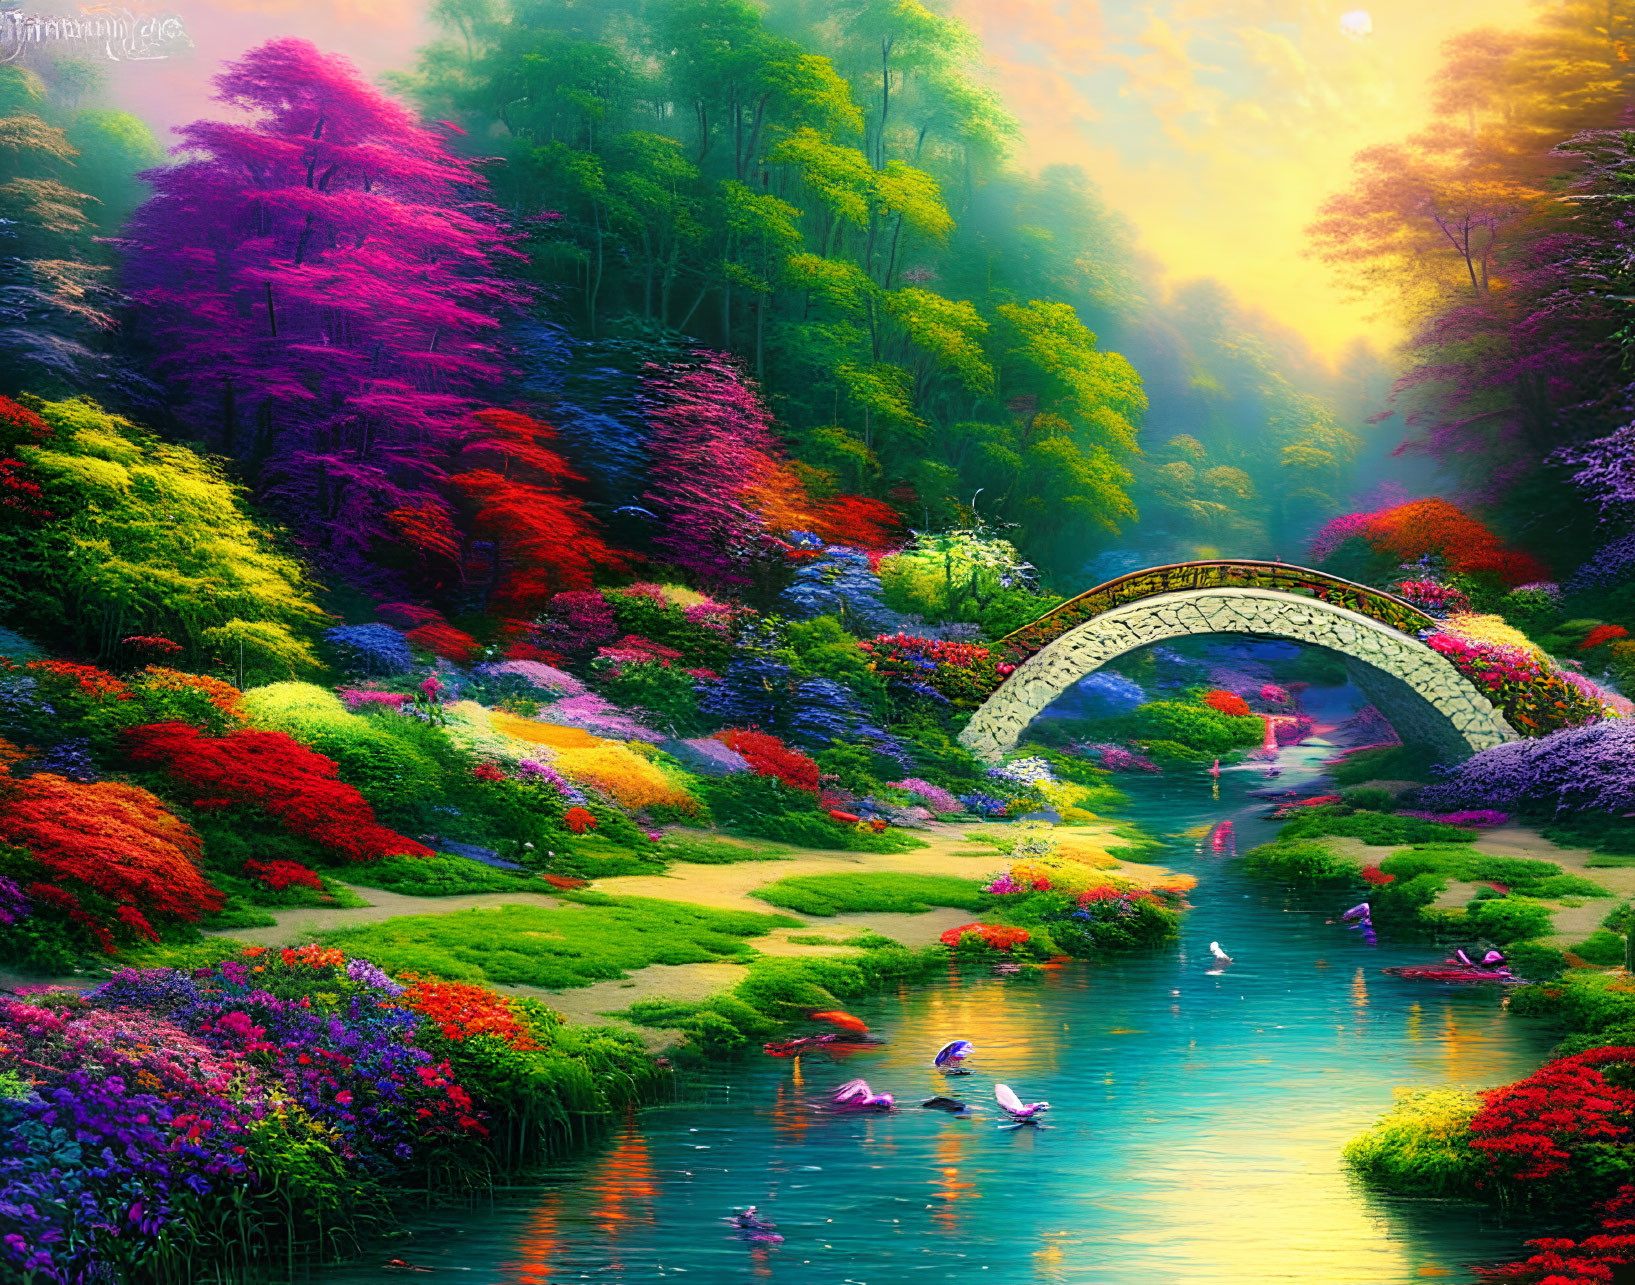 Colorful Garden with Arched Bridge, River, Birds, and Forest at Sunset